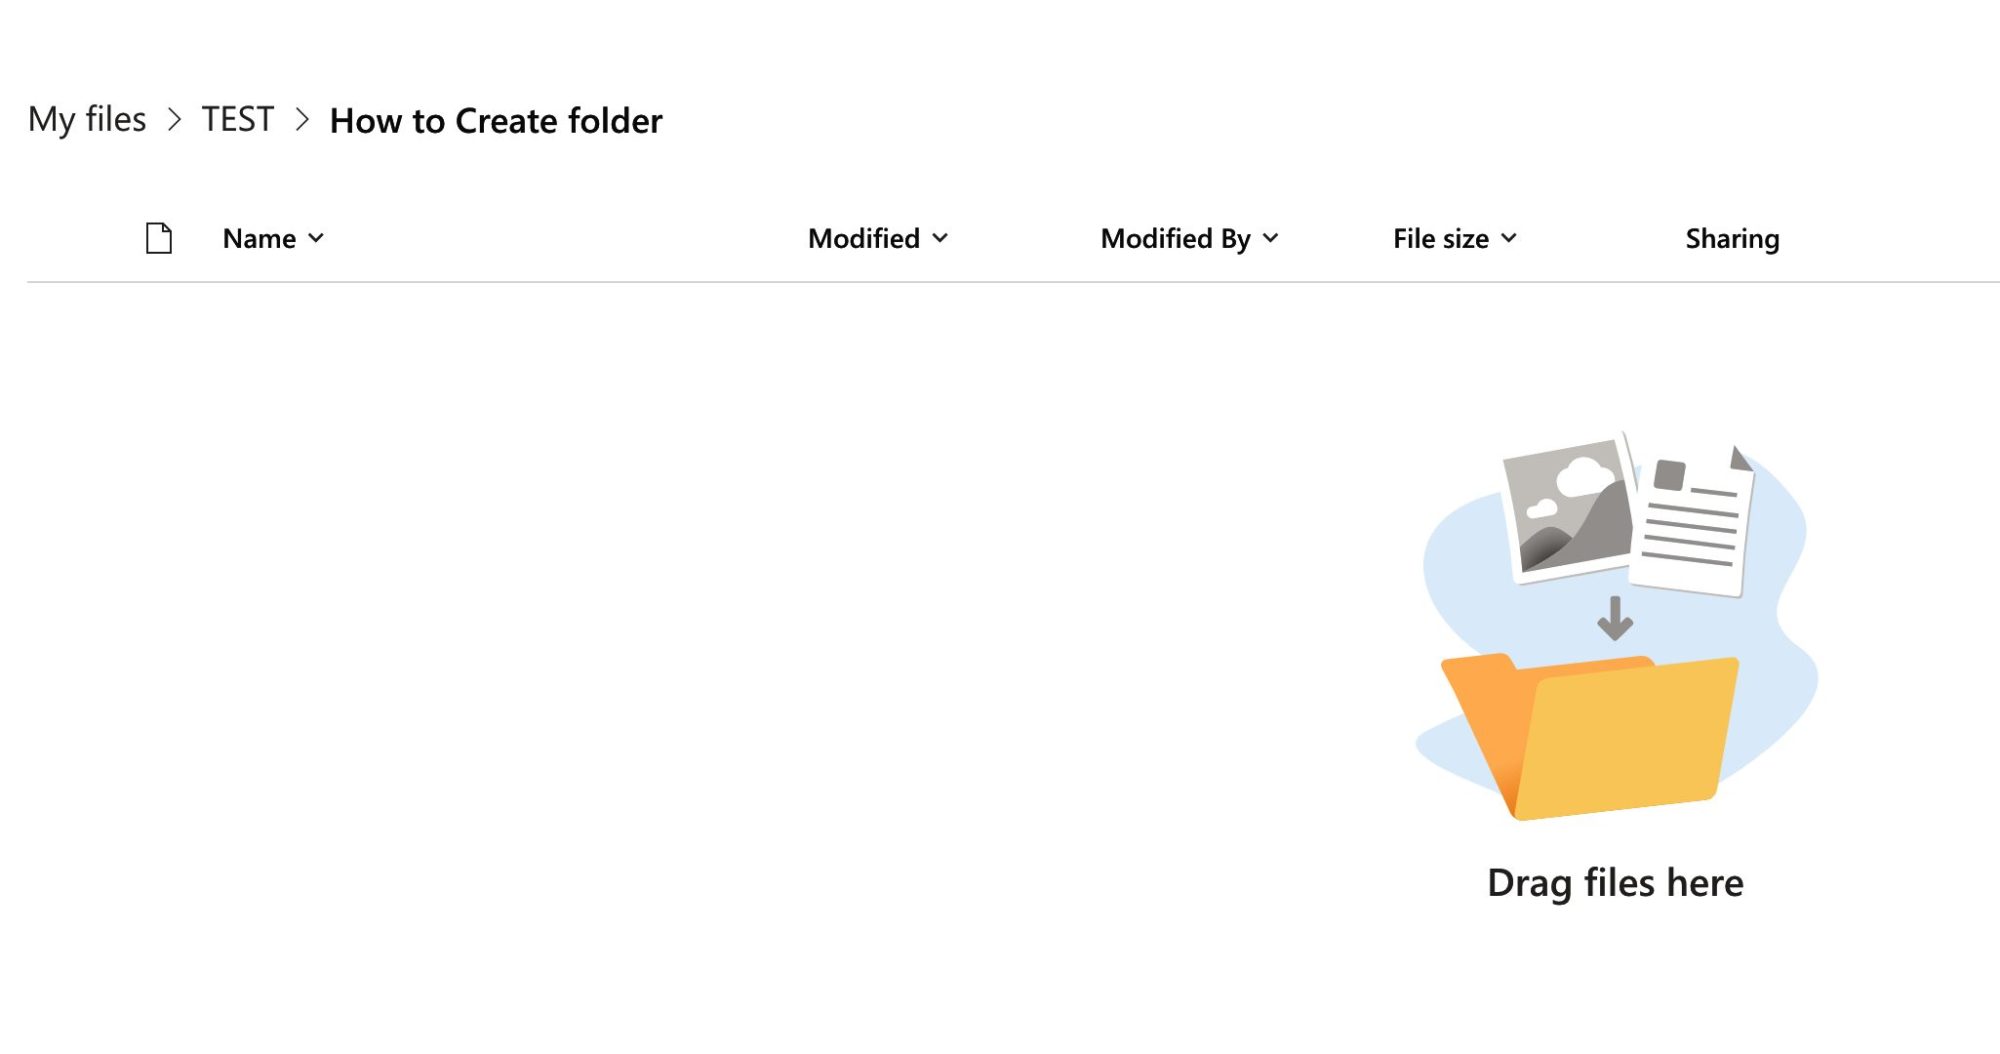 Power Automate: Create A Folder In Onedrive - Manuel T. Gomes